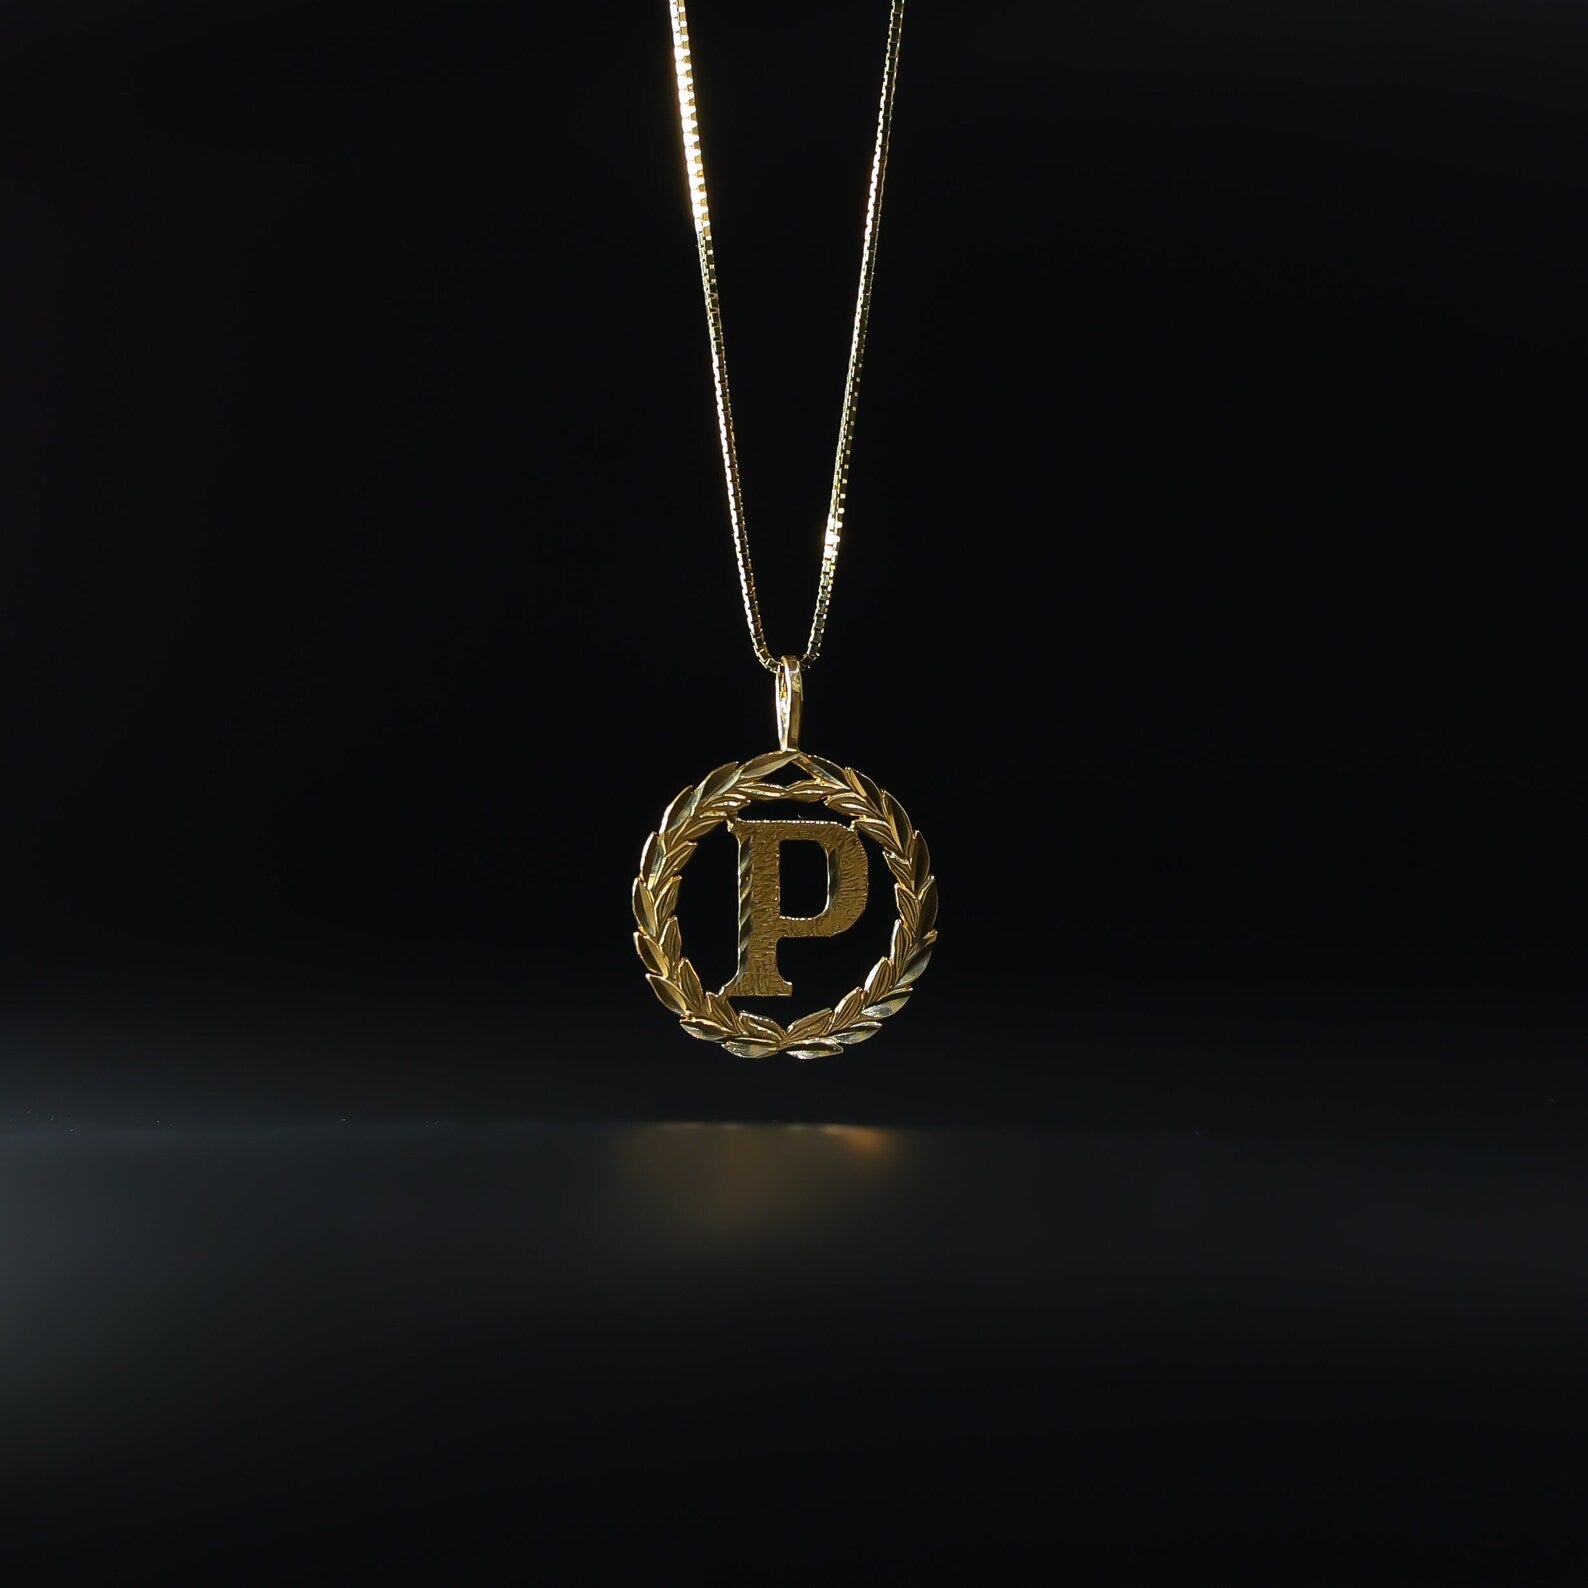 Gold Wreath P Initial Pendant | A-Z Pendants - Charlie & Co. Jewelry